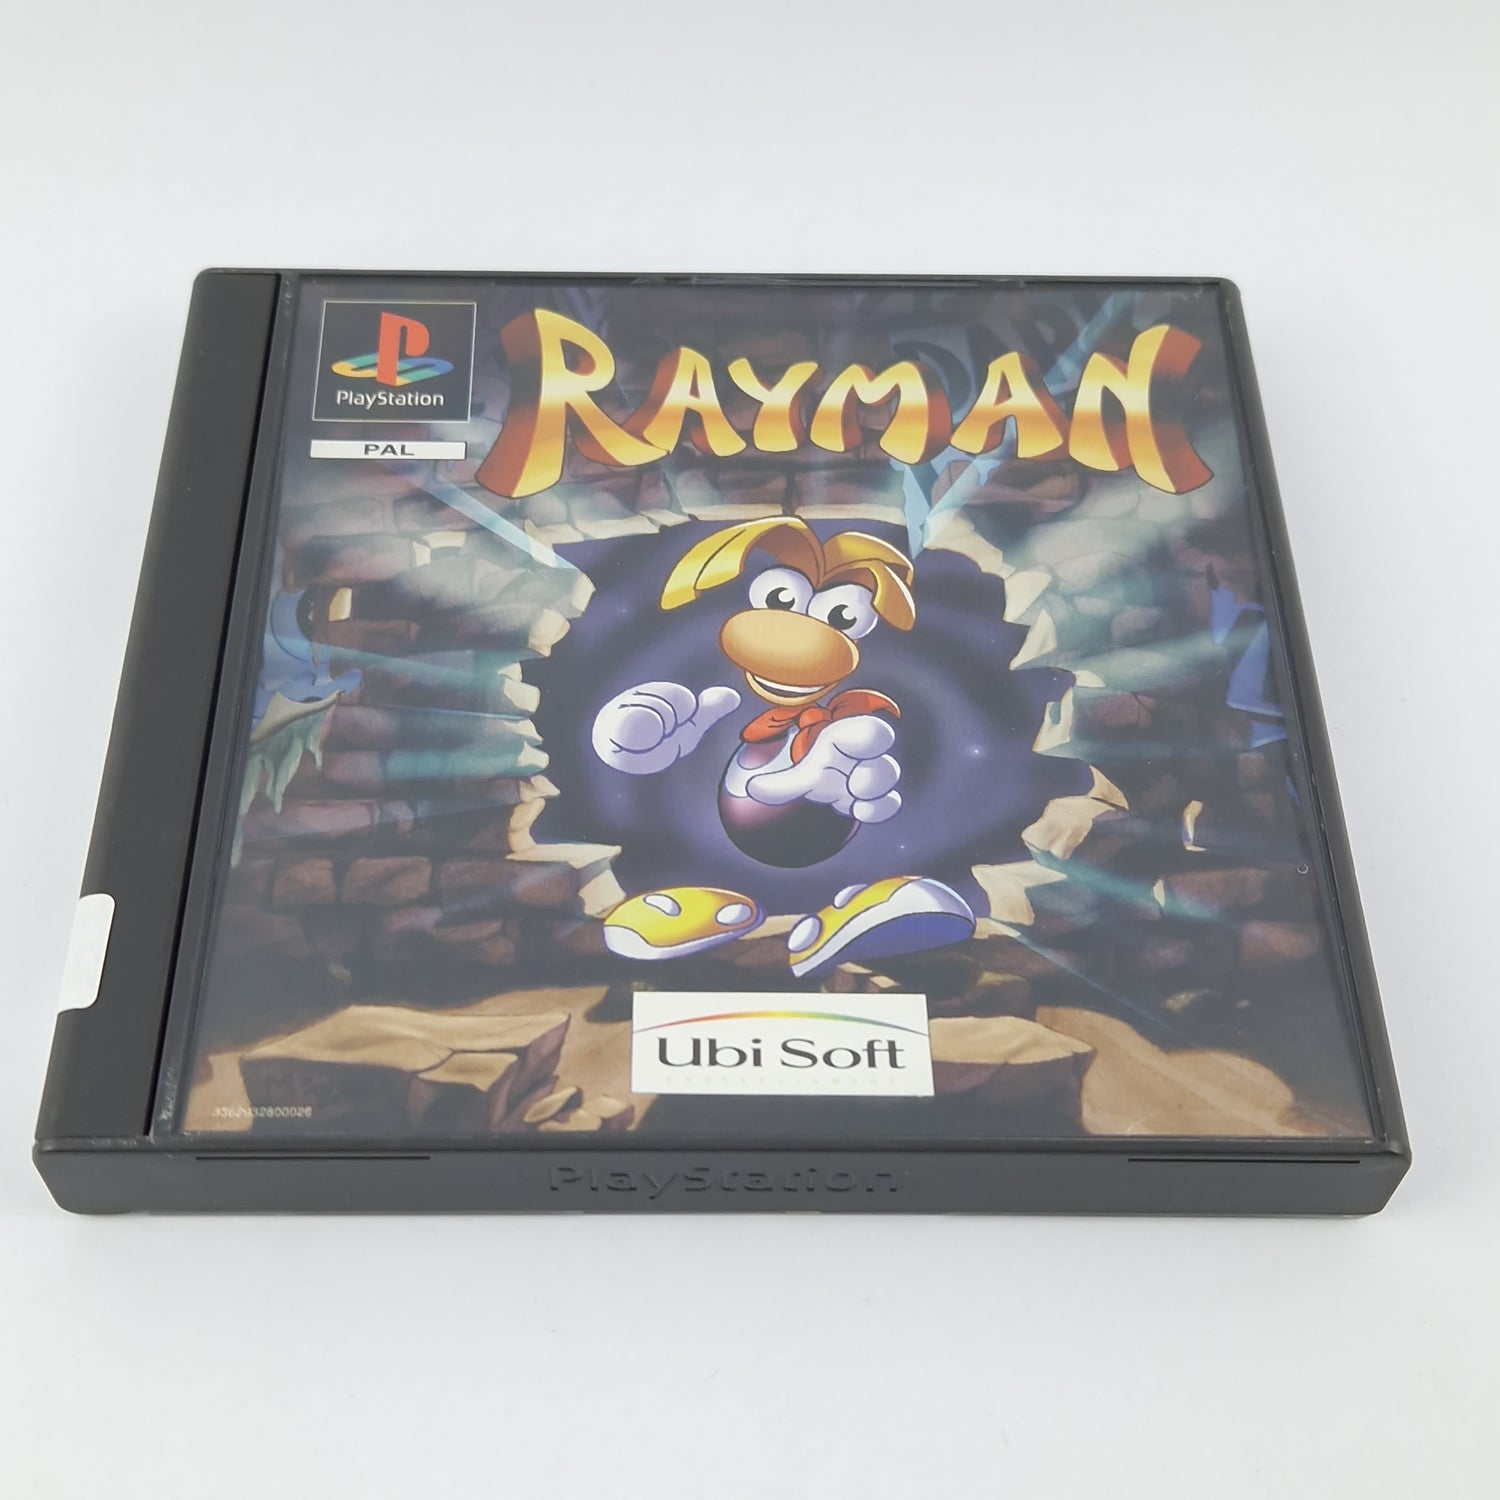 Playstation 1 Spiel : Rayman - CD Anleitung OVP | SONY PS1 PSX PAL Ubisoft